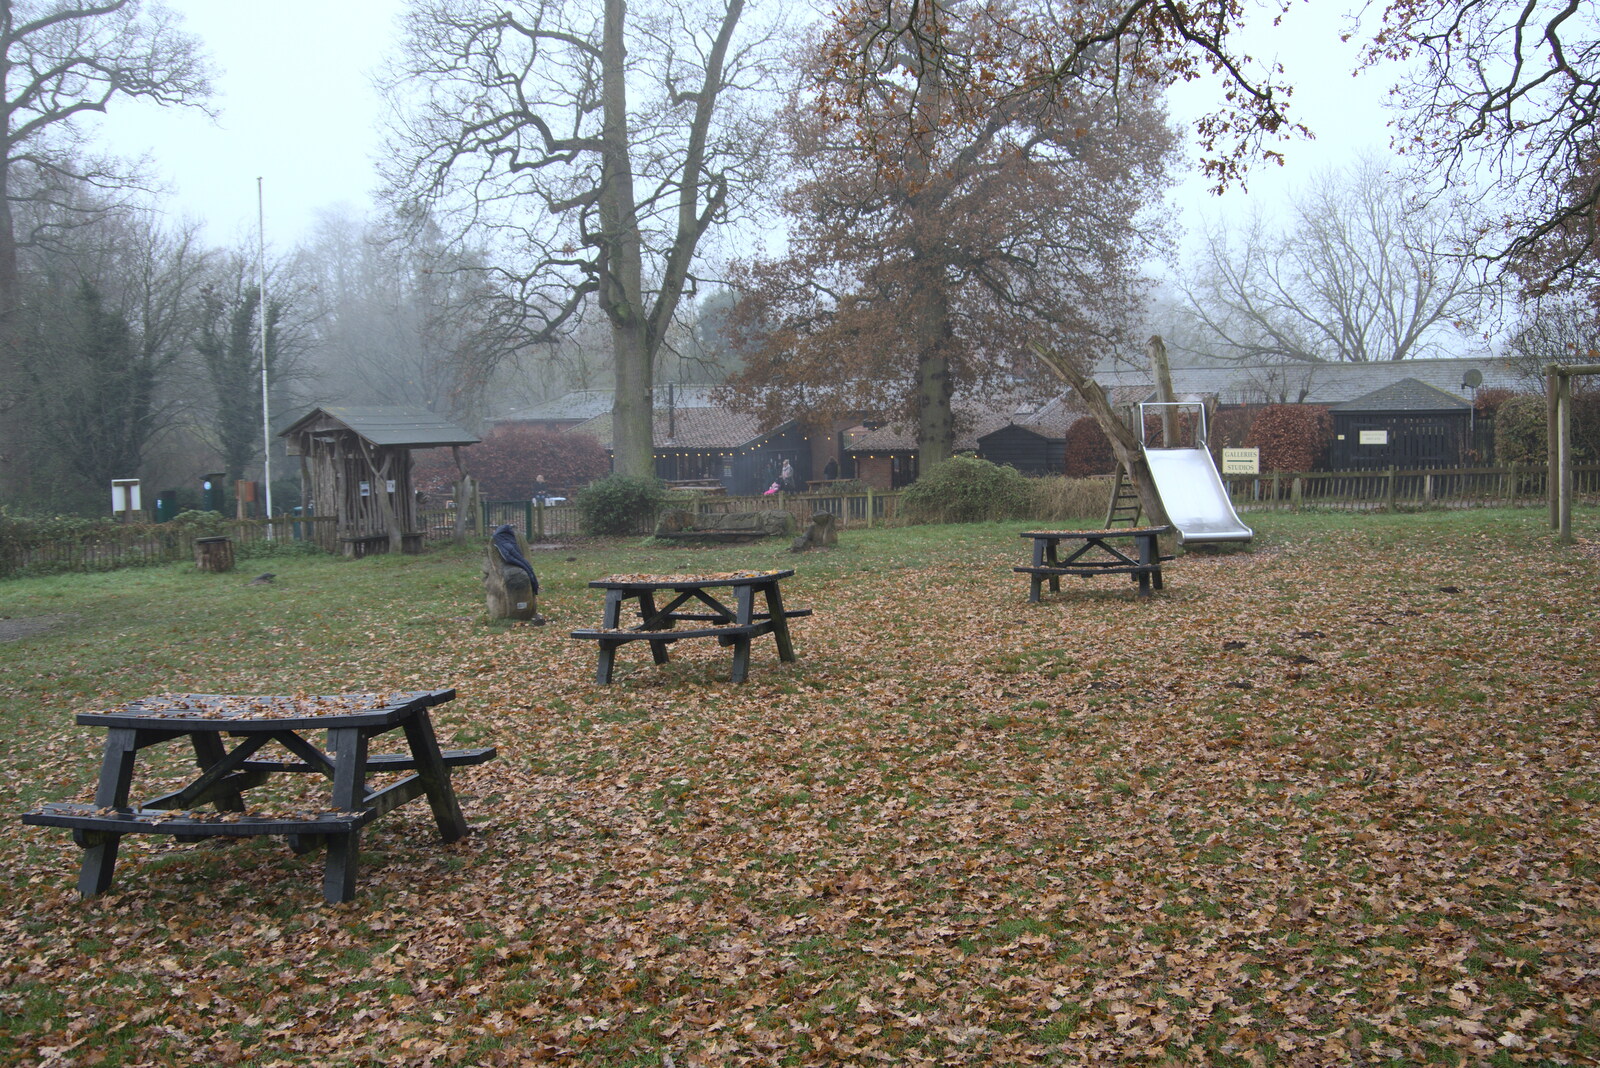 Thornham playground with its covering of leaves from A Return to Thornham Walks, Thornham, Suffolk - 19th December 2021